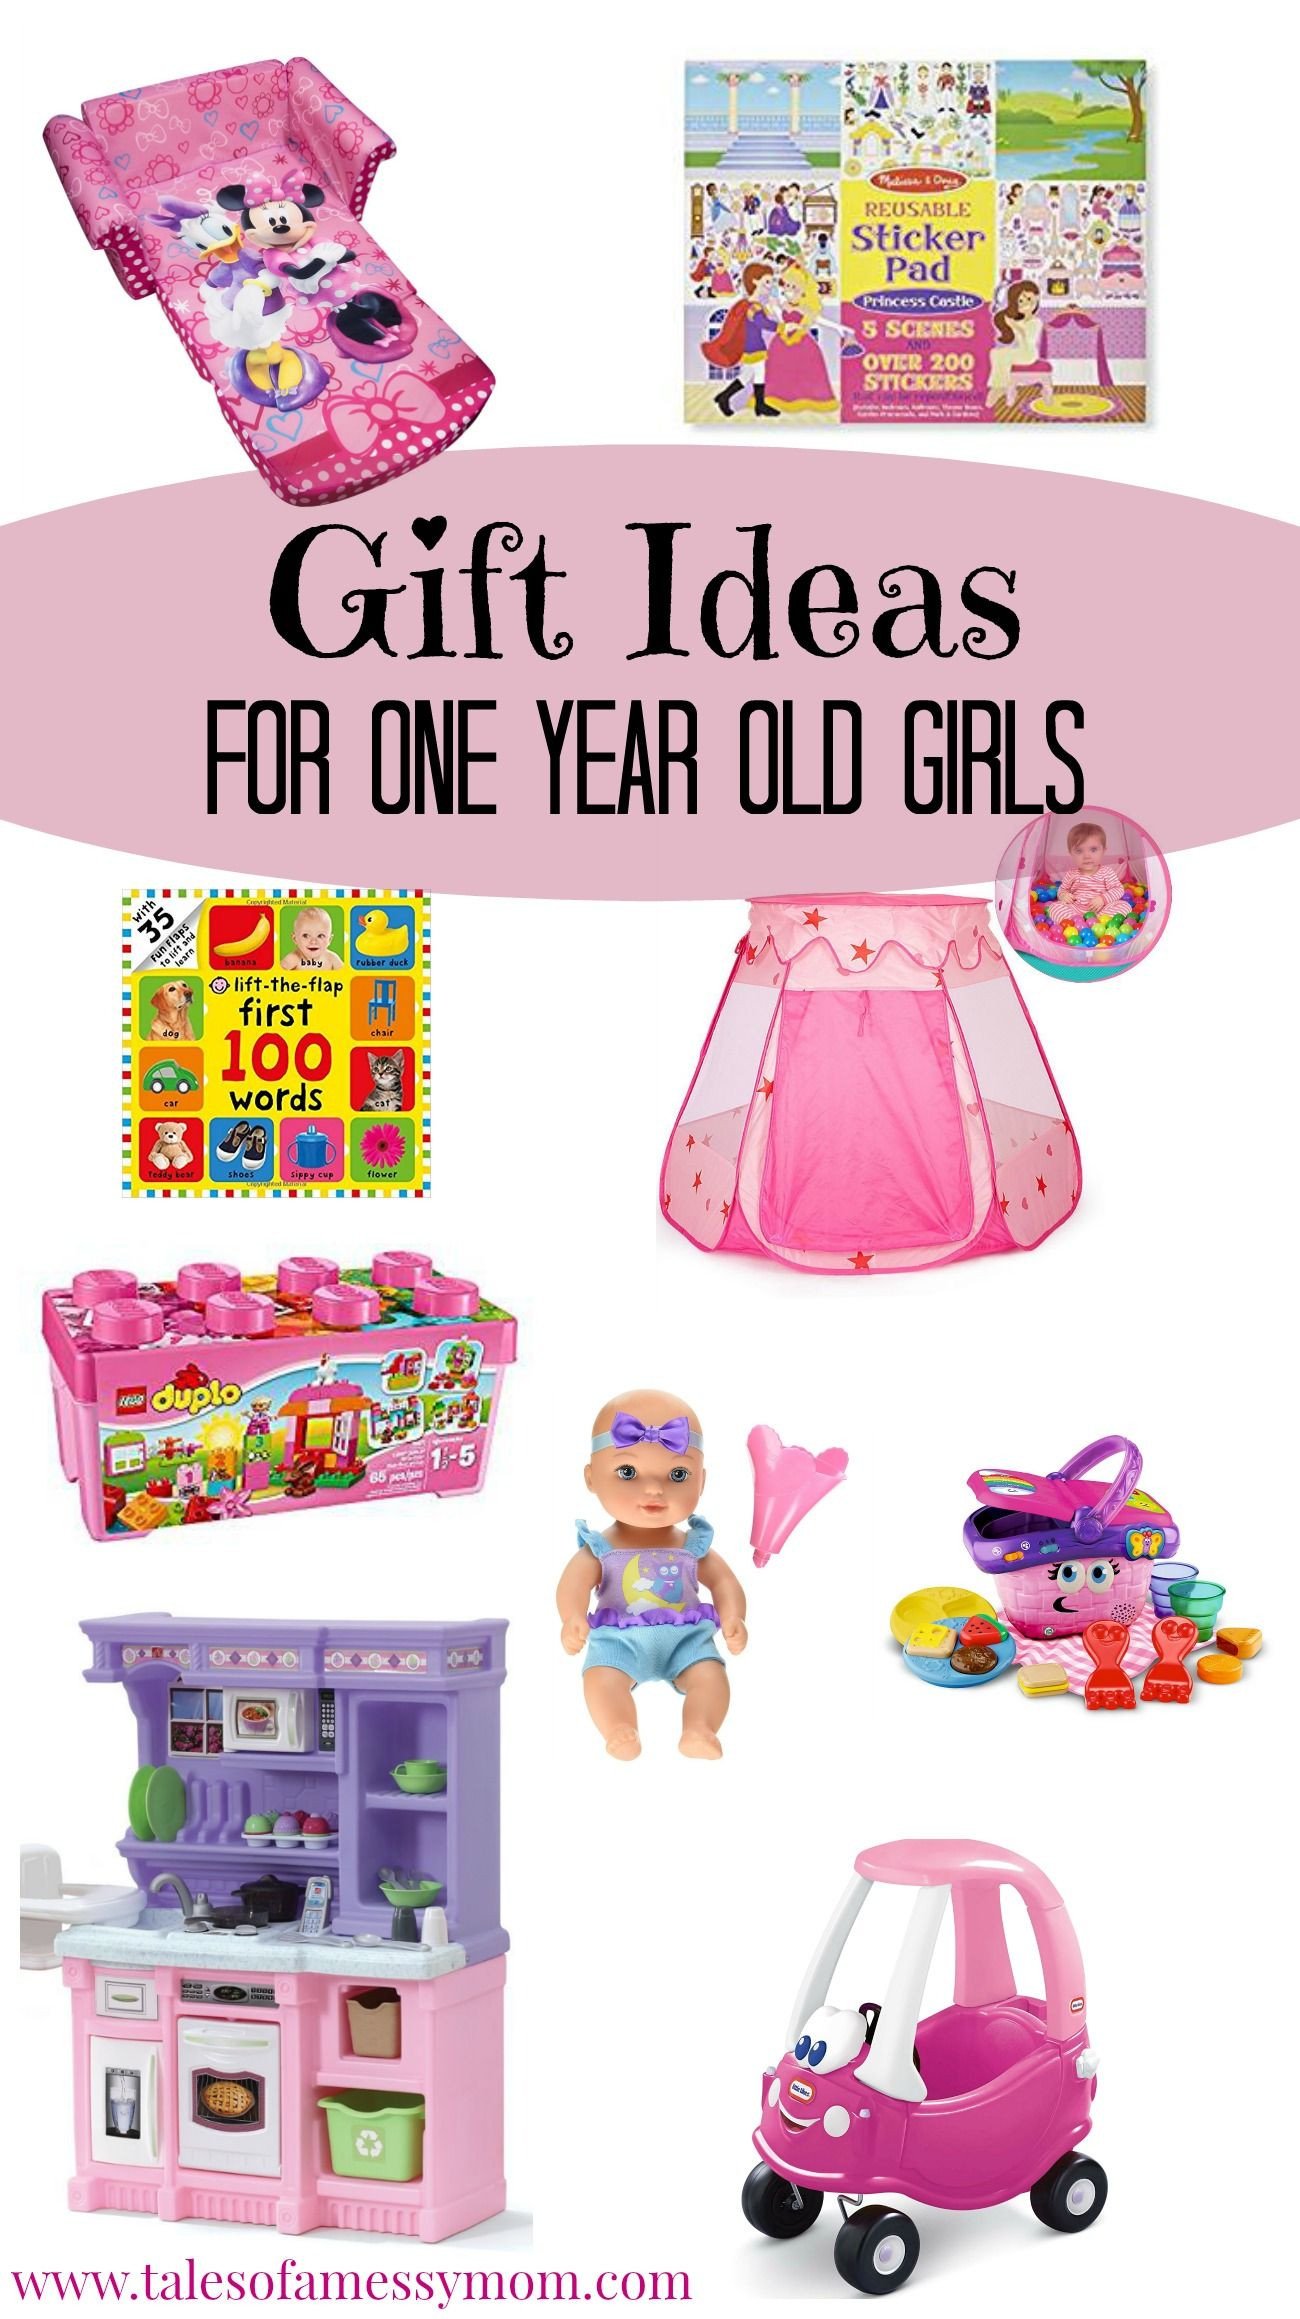 One Year Old Birthday Gift Ideas
 Gift Ideas for e Year Old Girls